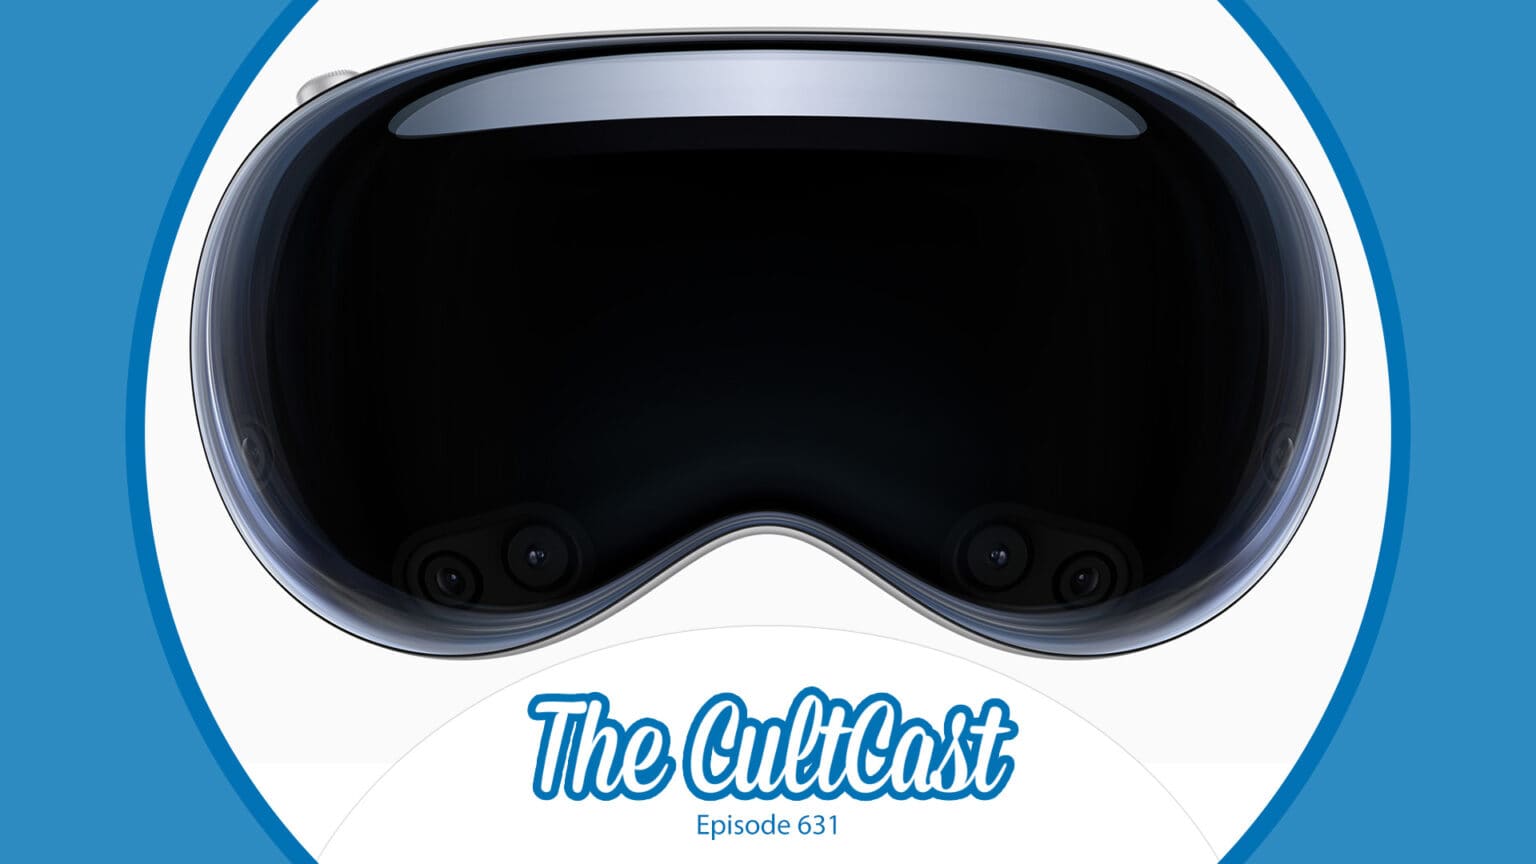 Vision Pro headset, The CultCast episode 631